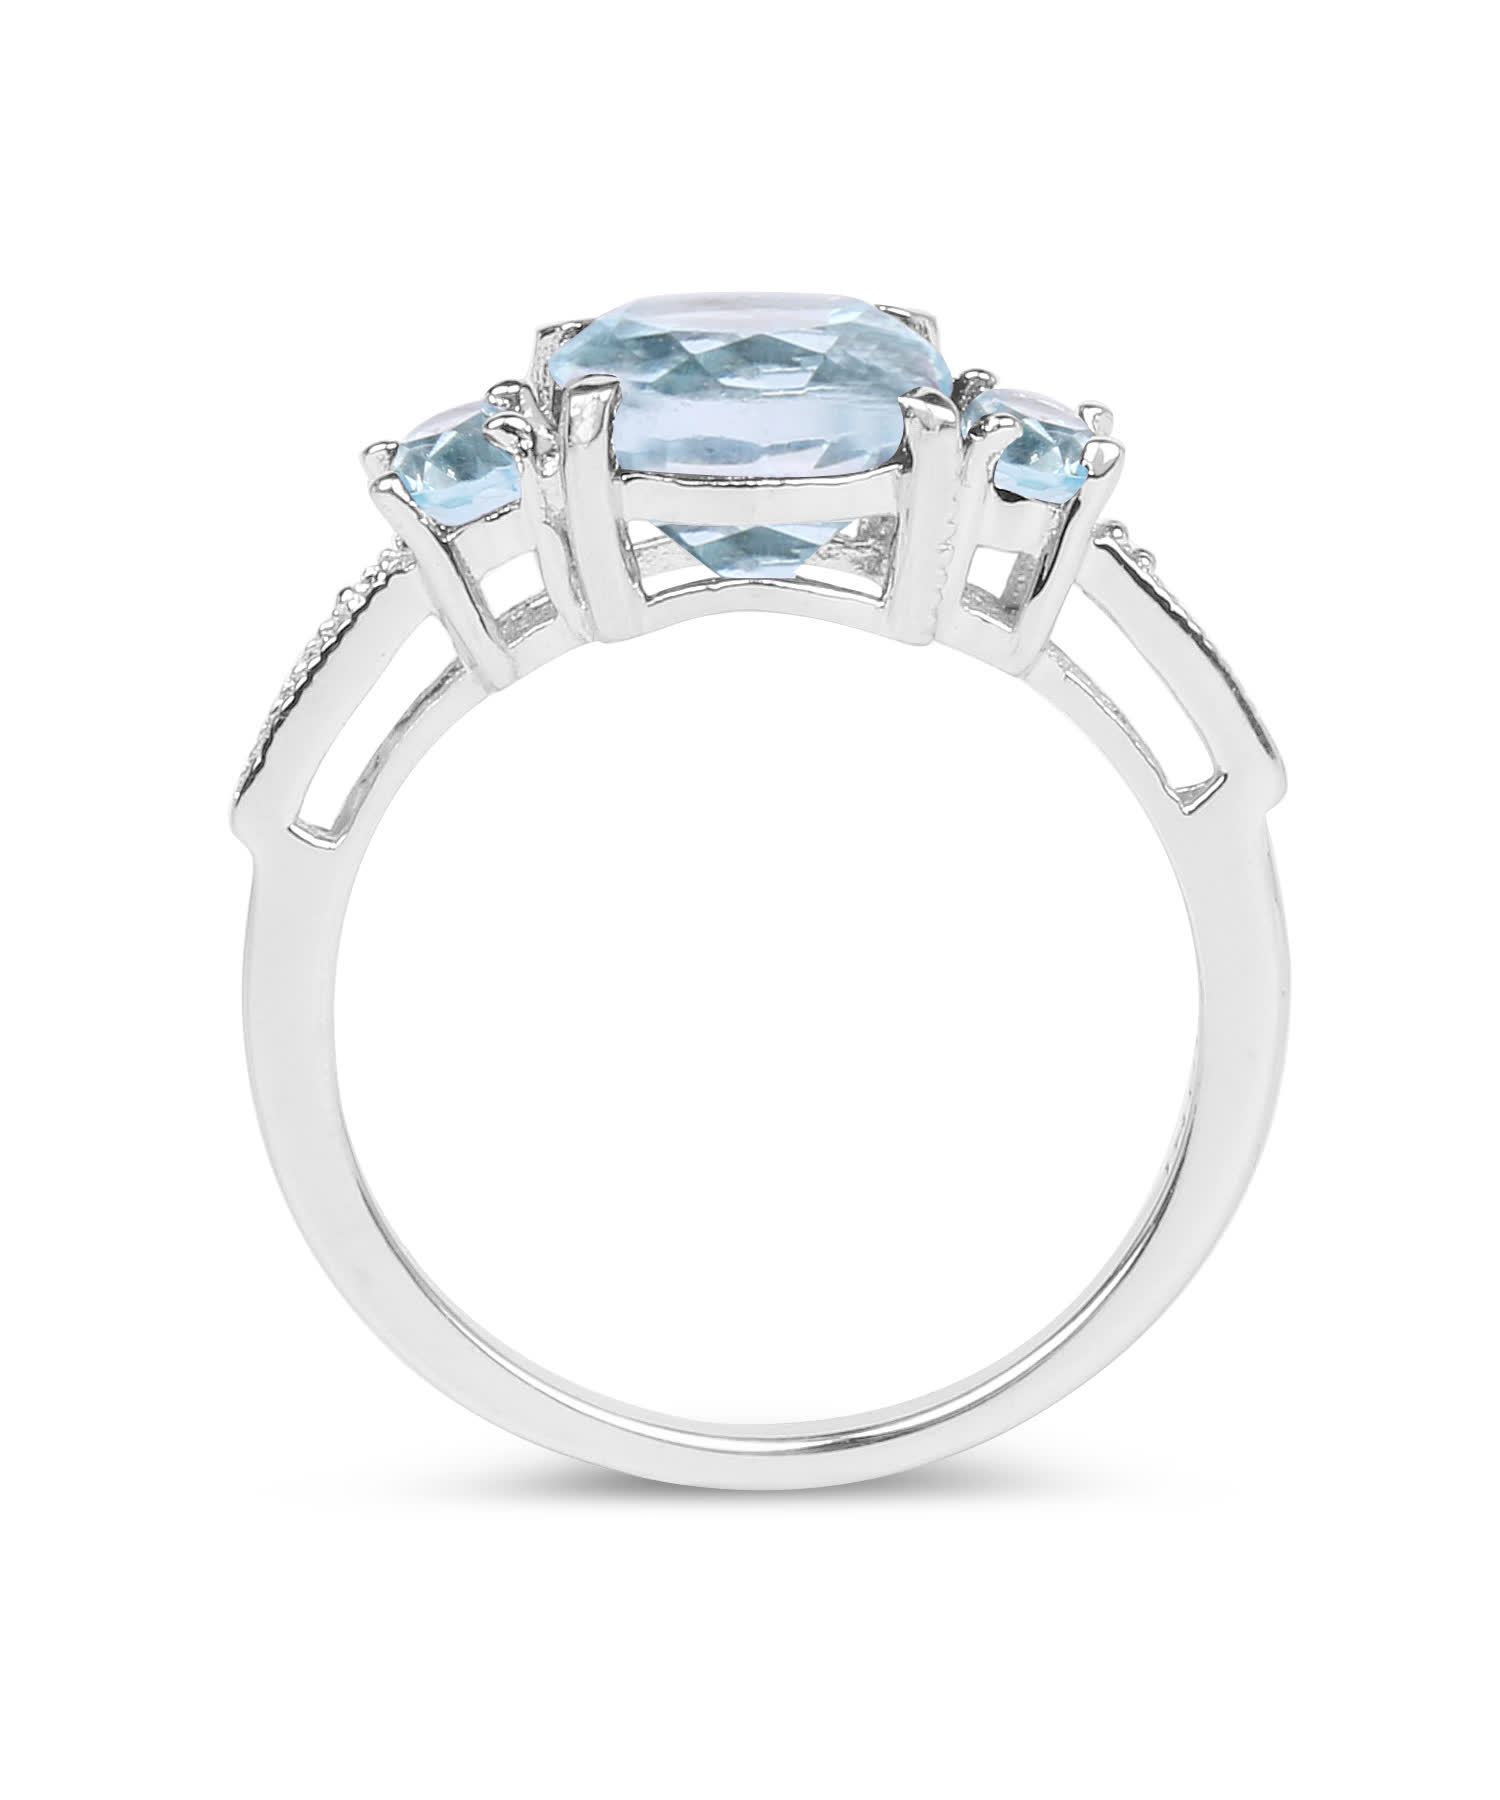 2.91ctw Natural Sky Blue Topaz Rhodium Plated 925 Sterling Silver Three-Stone Ring View 2